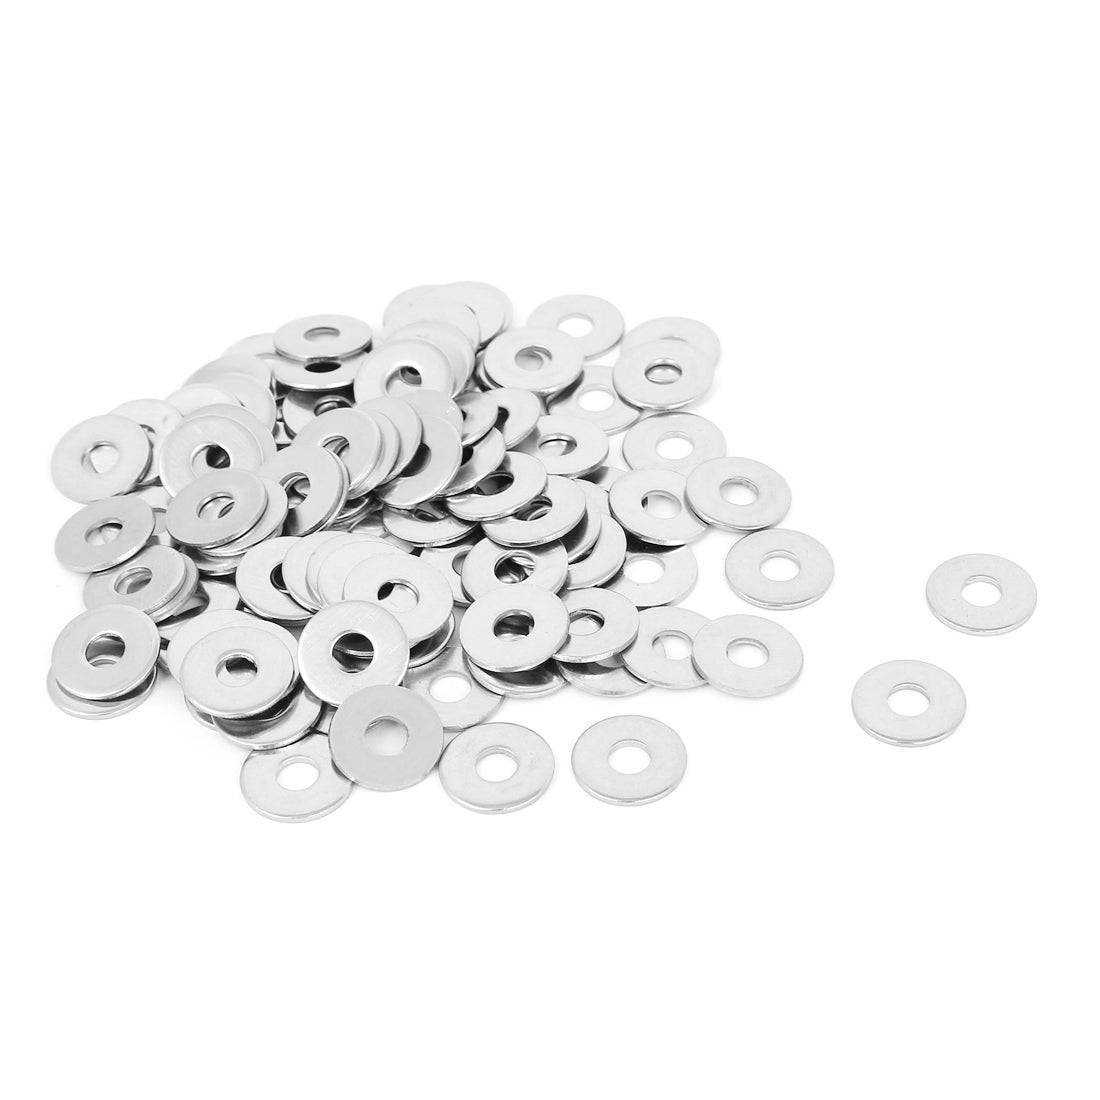 uxcell Uxcell 100Pcs M5x15mmx1.2mm Stainless Steel Metric Round Flat Washer for Bolt Screw